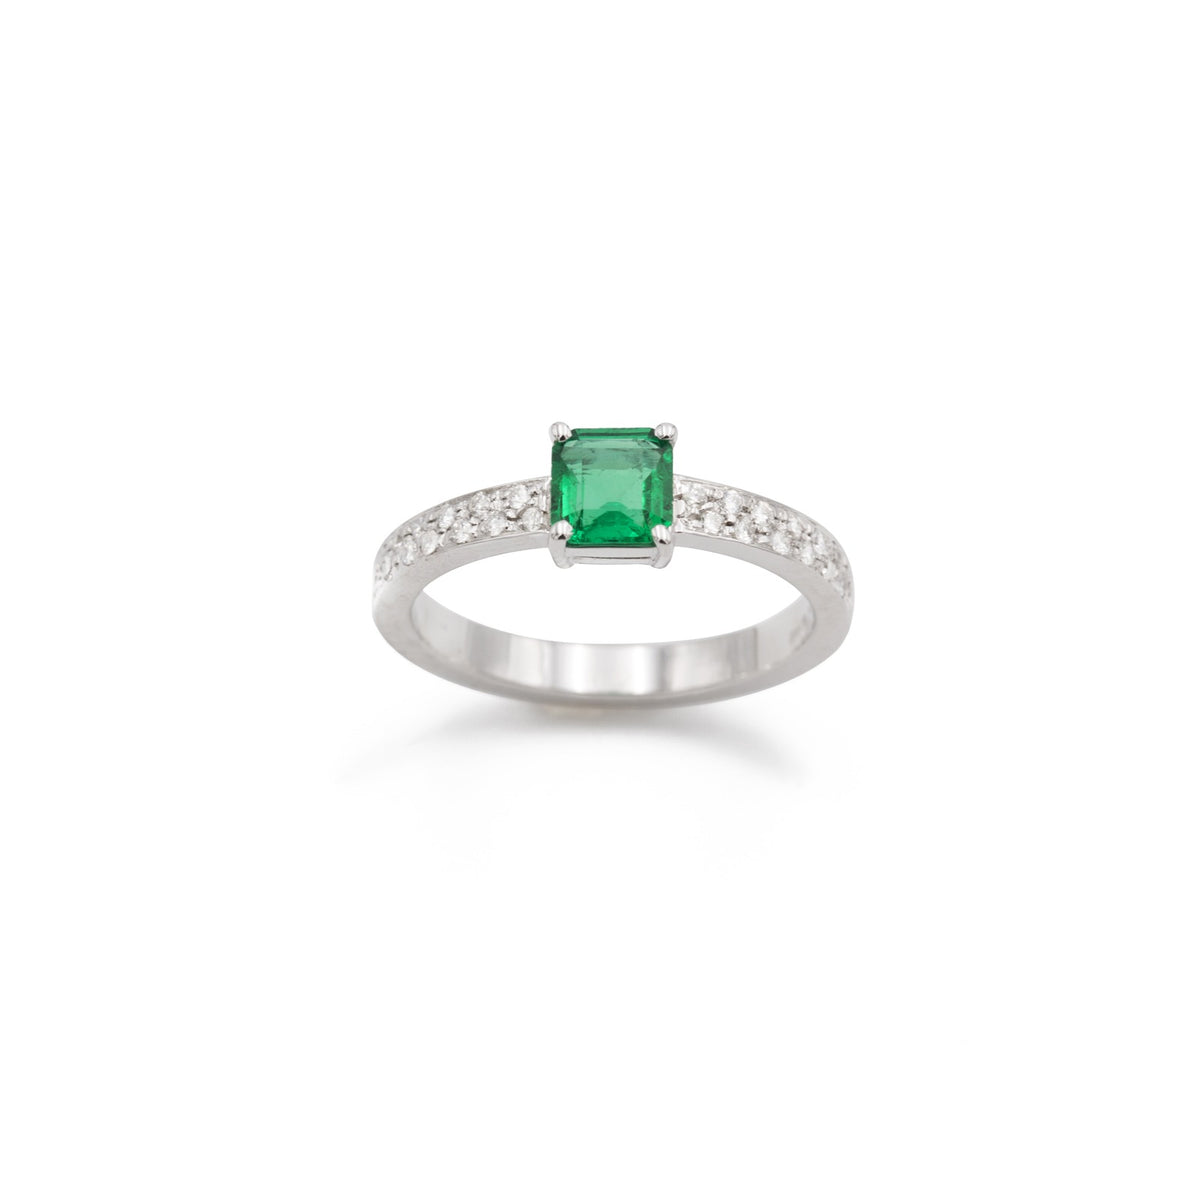 Ring with diamonds and square emerald